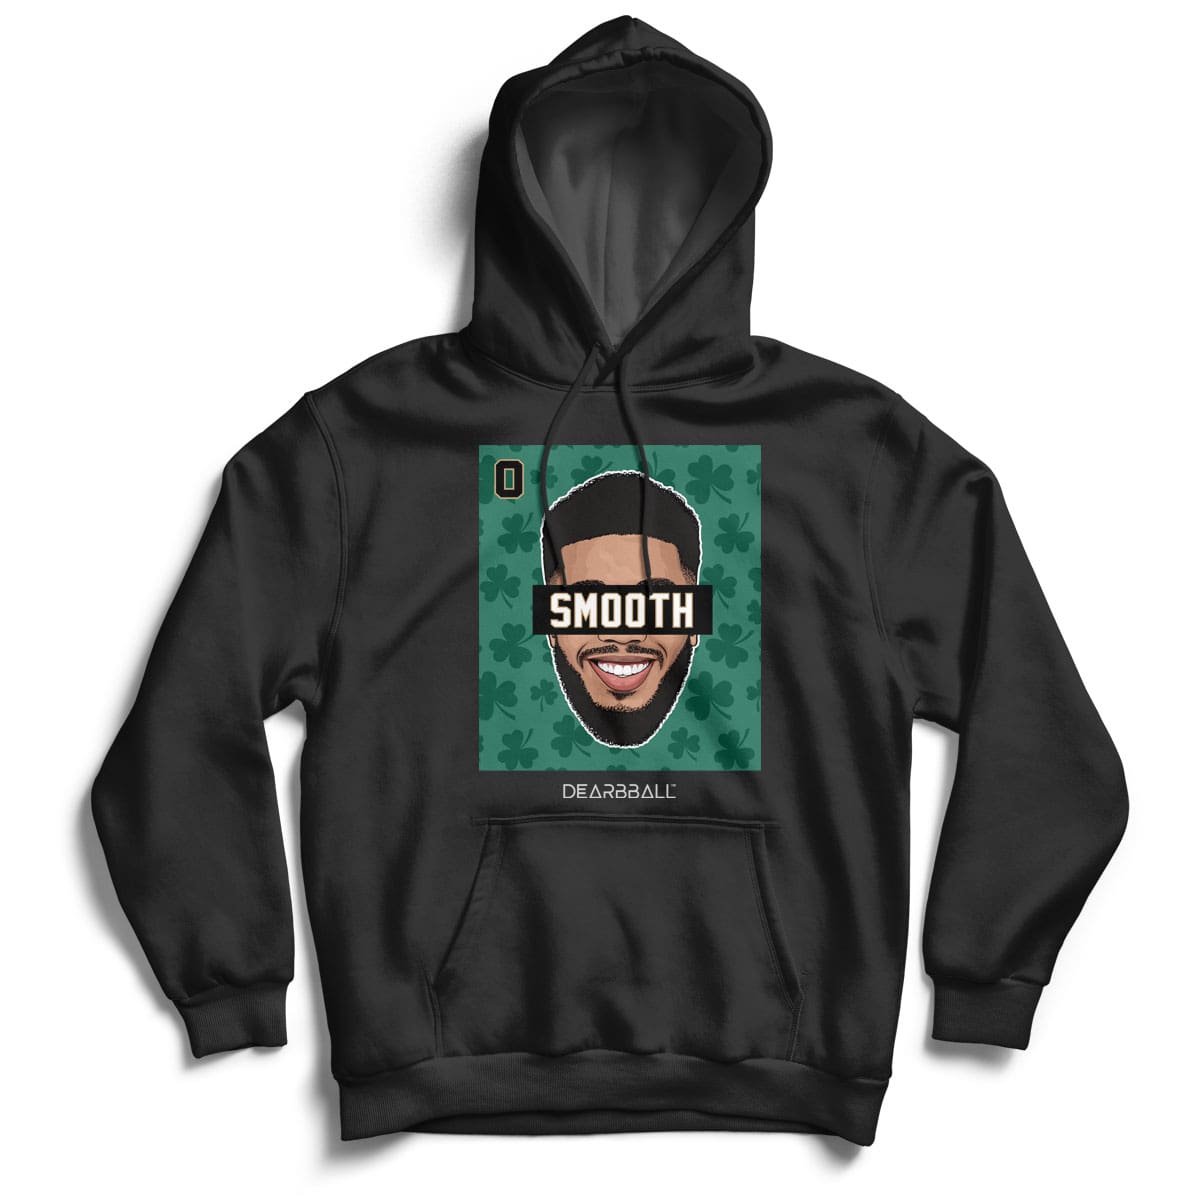 DearBBall Hoodie - SMOOTH 0 Clovers Edition 